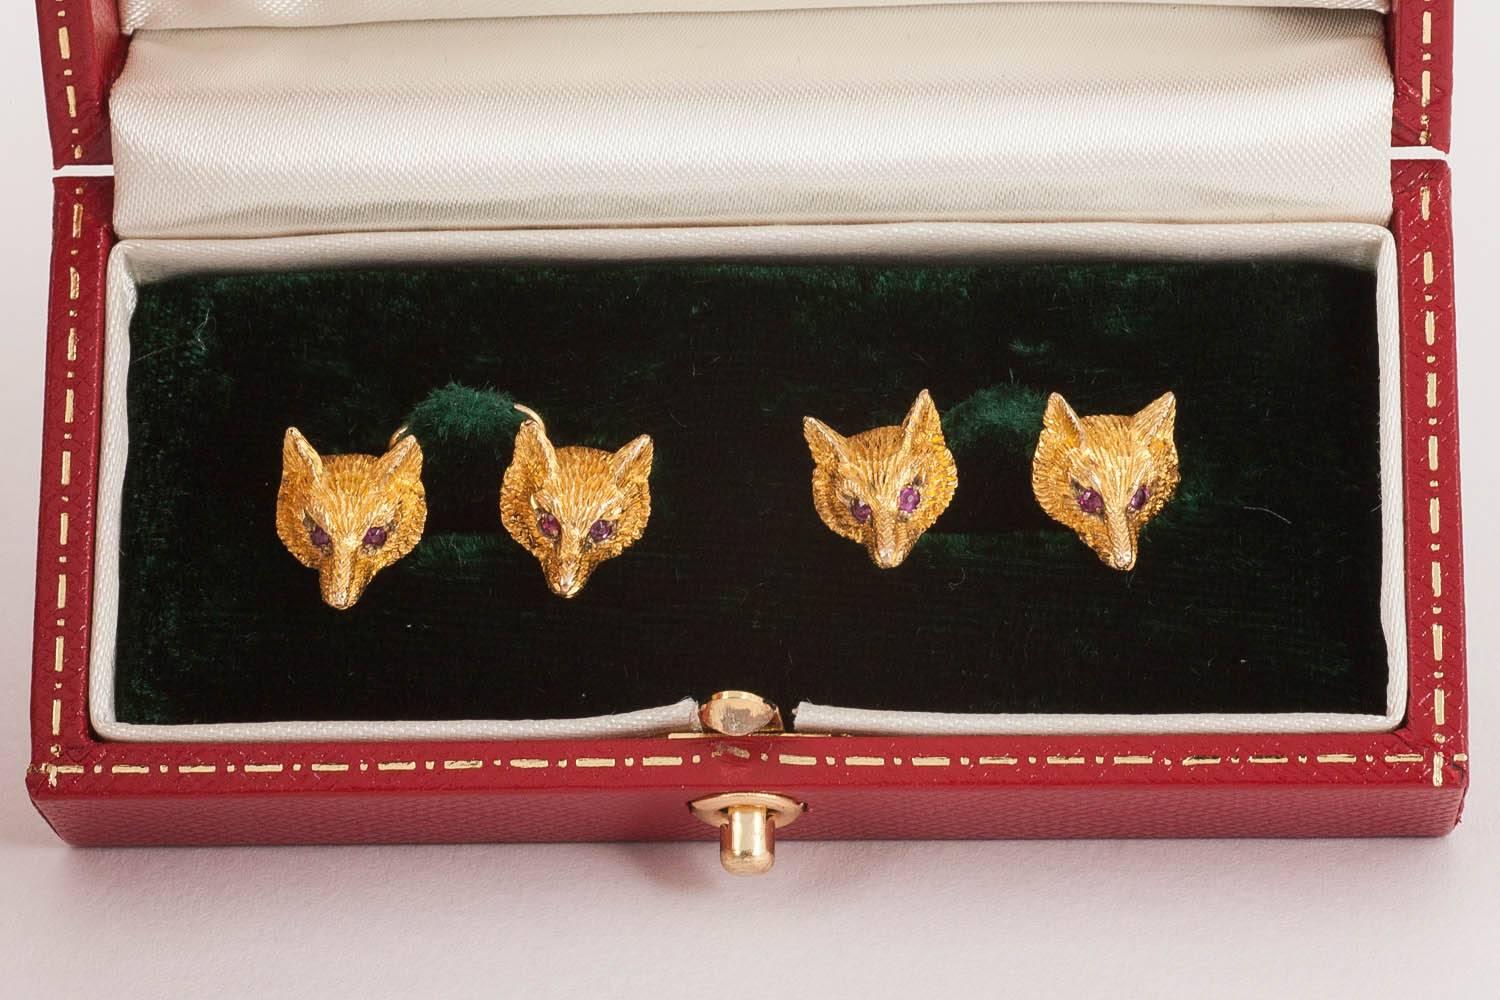 Pair of chased ,9ct gold cufflinks of Fox heads with ruby eyes,10mm across, hallmarked fo birmingham 1931,chain link connections